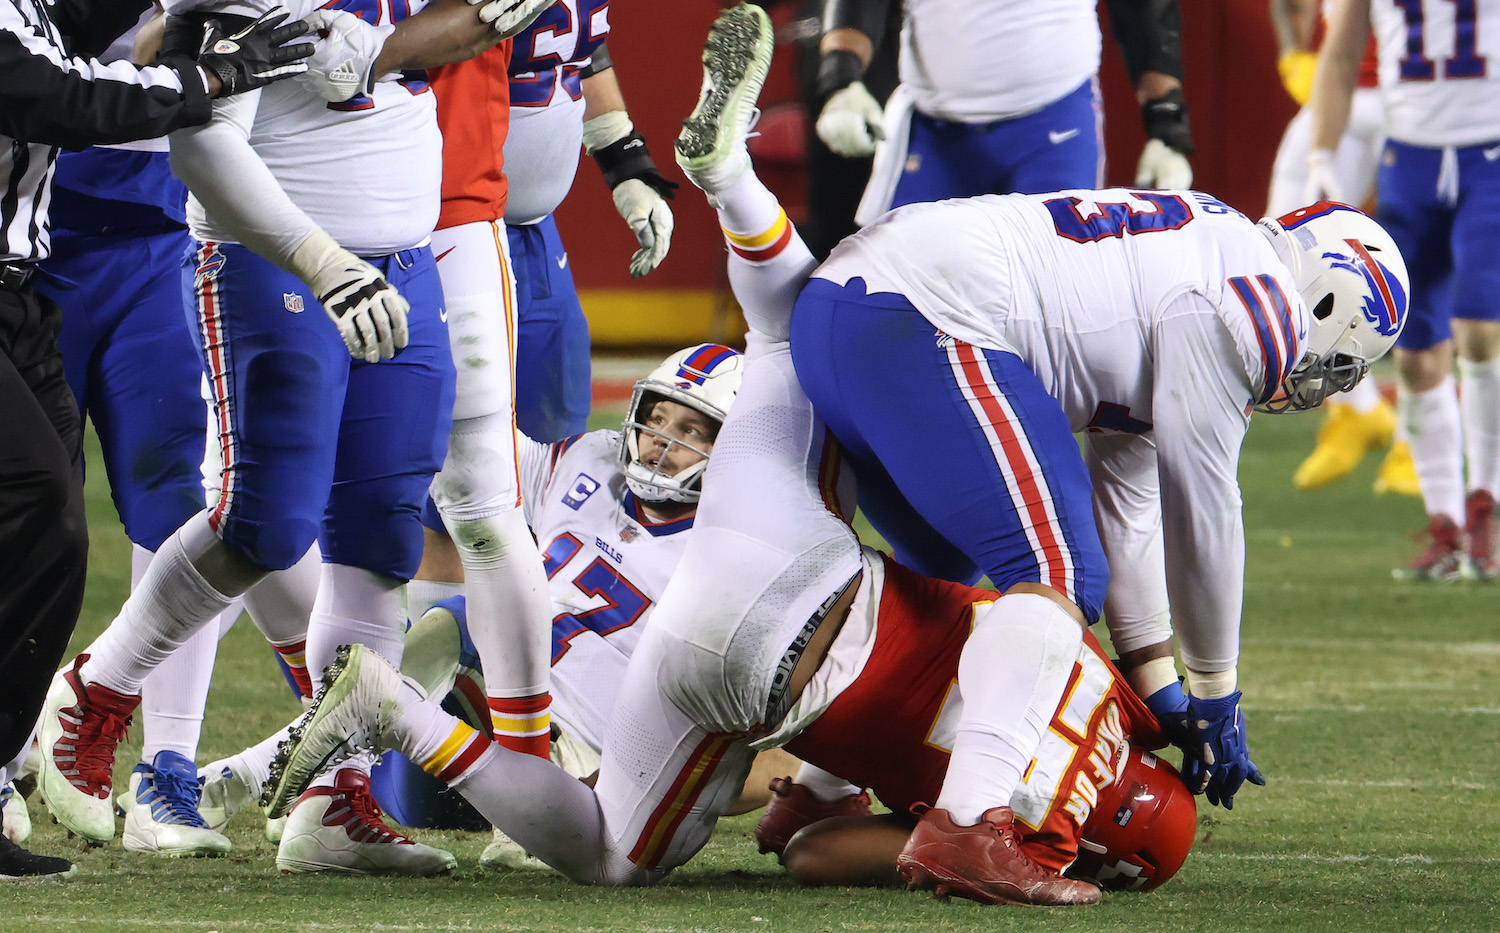 KANSAS CITY, MISSOURI - JANUARY 24: Dion Dawkins #73 of the Buffalo Bills hits Alex Okafor #57 of the Kansas City Chiefs after a play in the fourth quarter during the AFC Championship game at Arrowhead Stadium on January 24, 2021 in Kansas City, Missouri. (Photo by Jamie Squire/Getty Images)